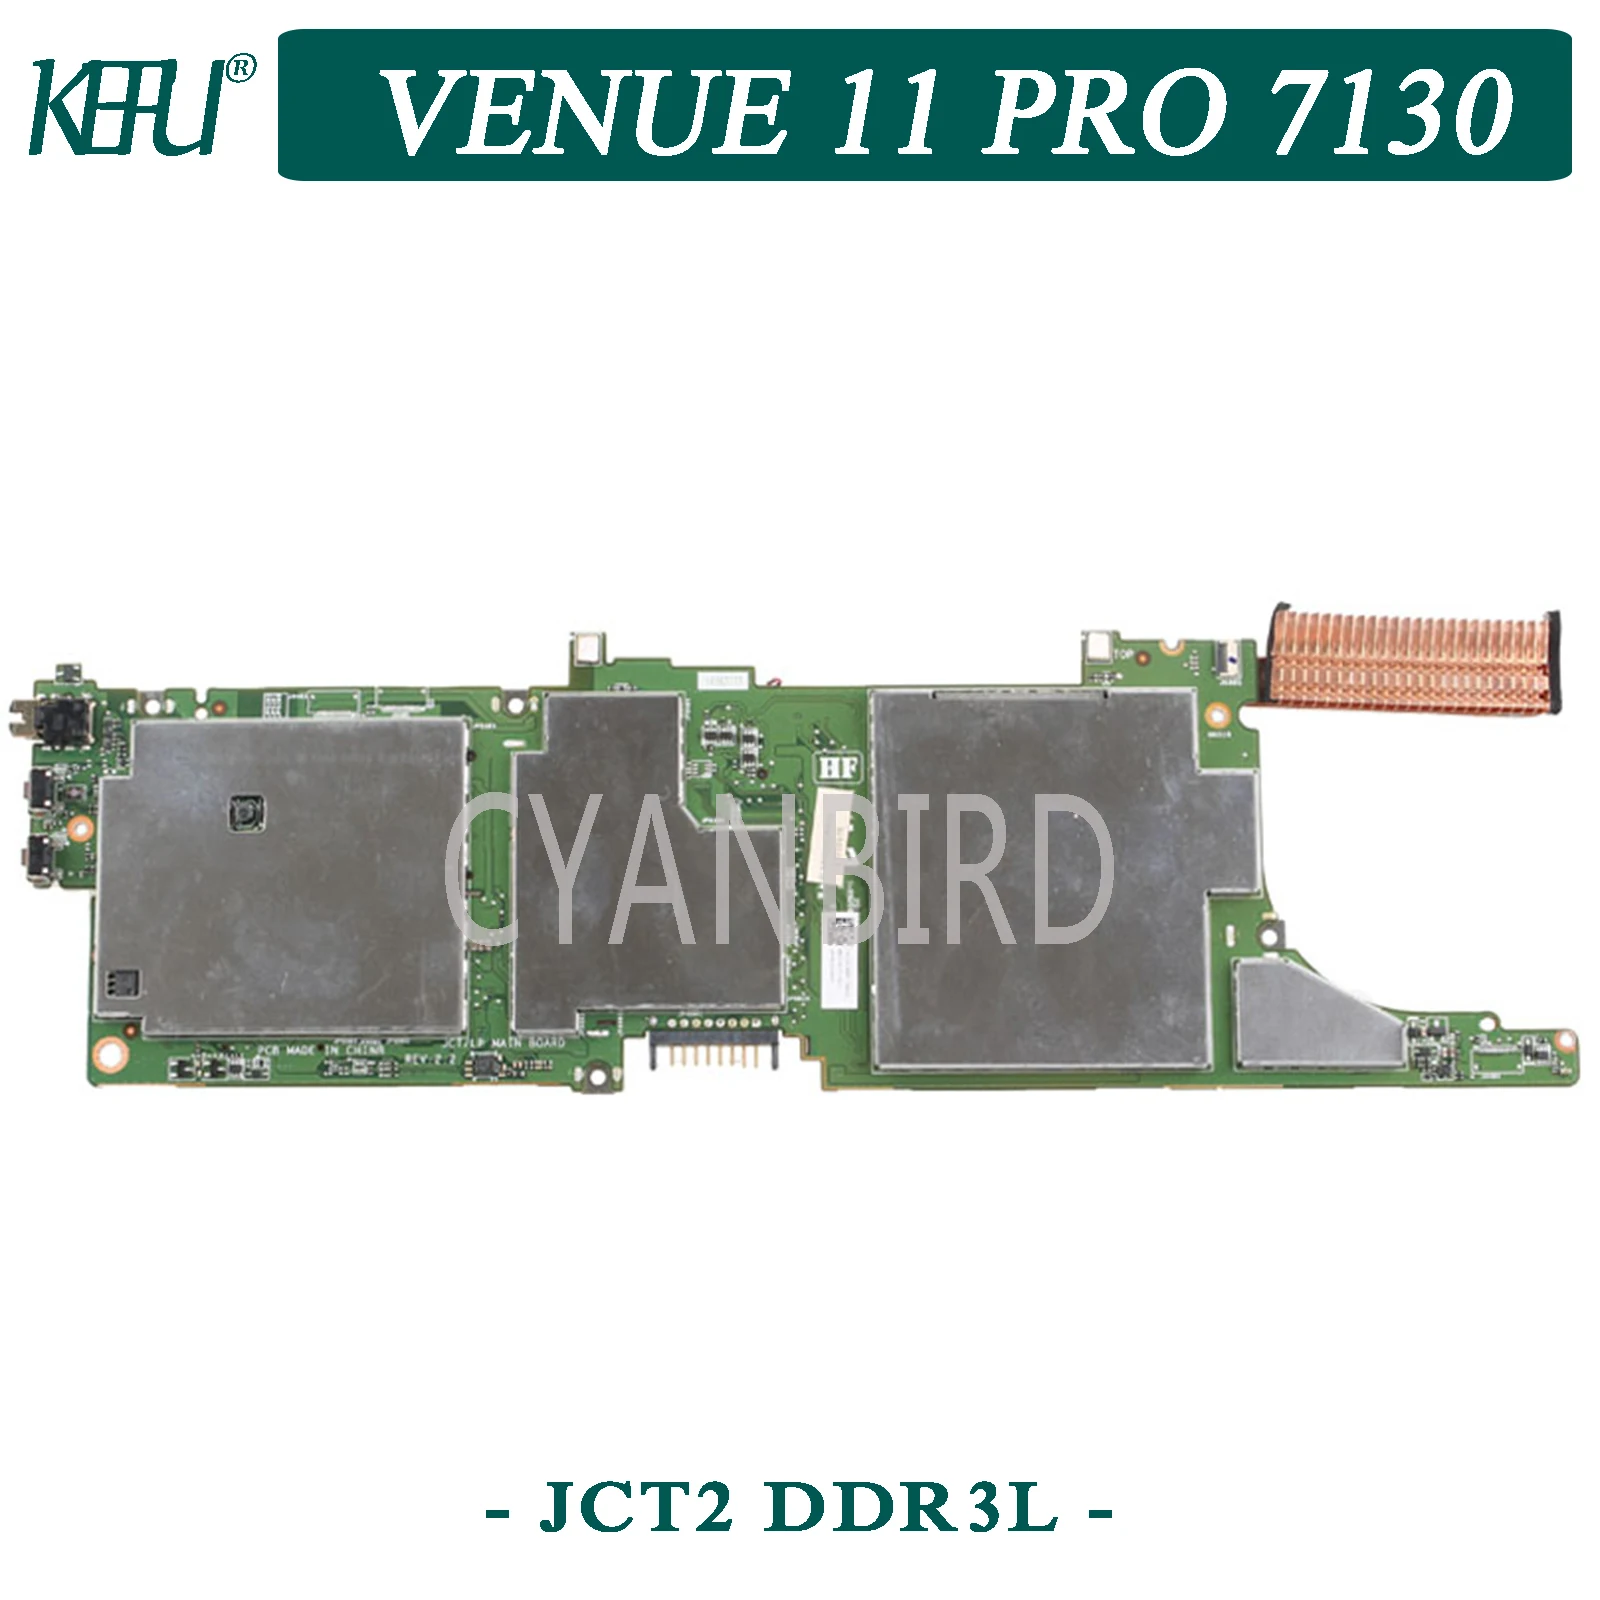 kefu jct2 ddr3l original mainboard for dell venue 11 pro 7130 with 8gb ram i5 4200y laptop motherboard free global shipping